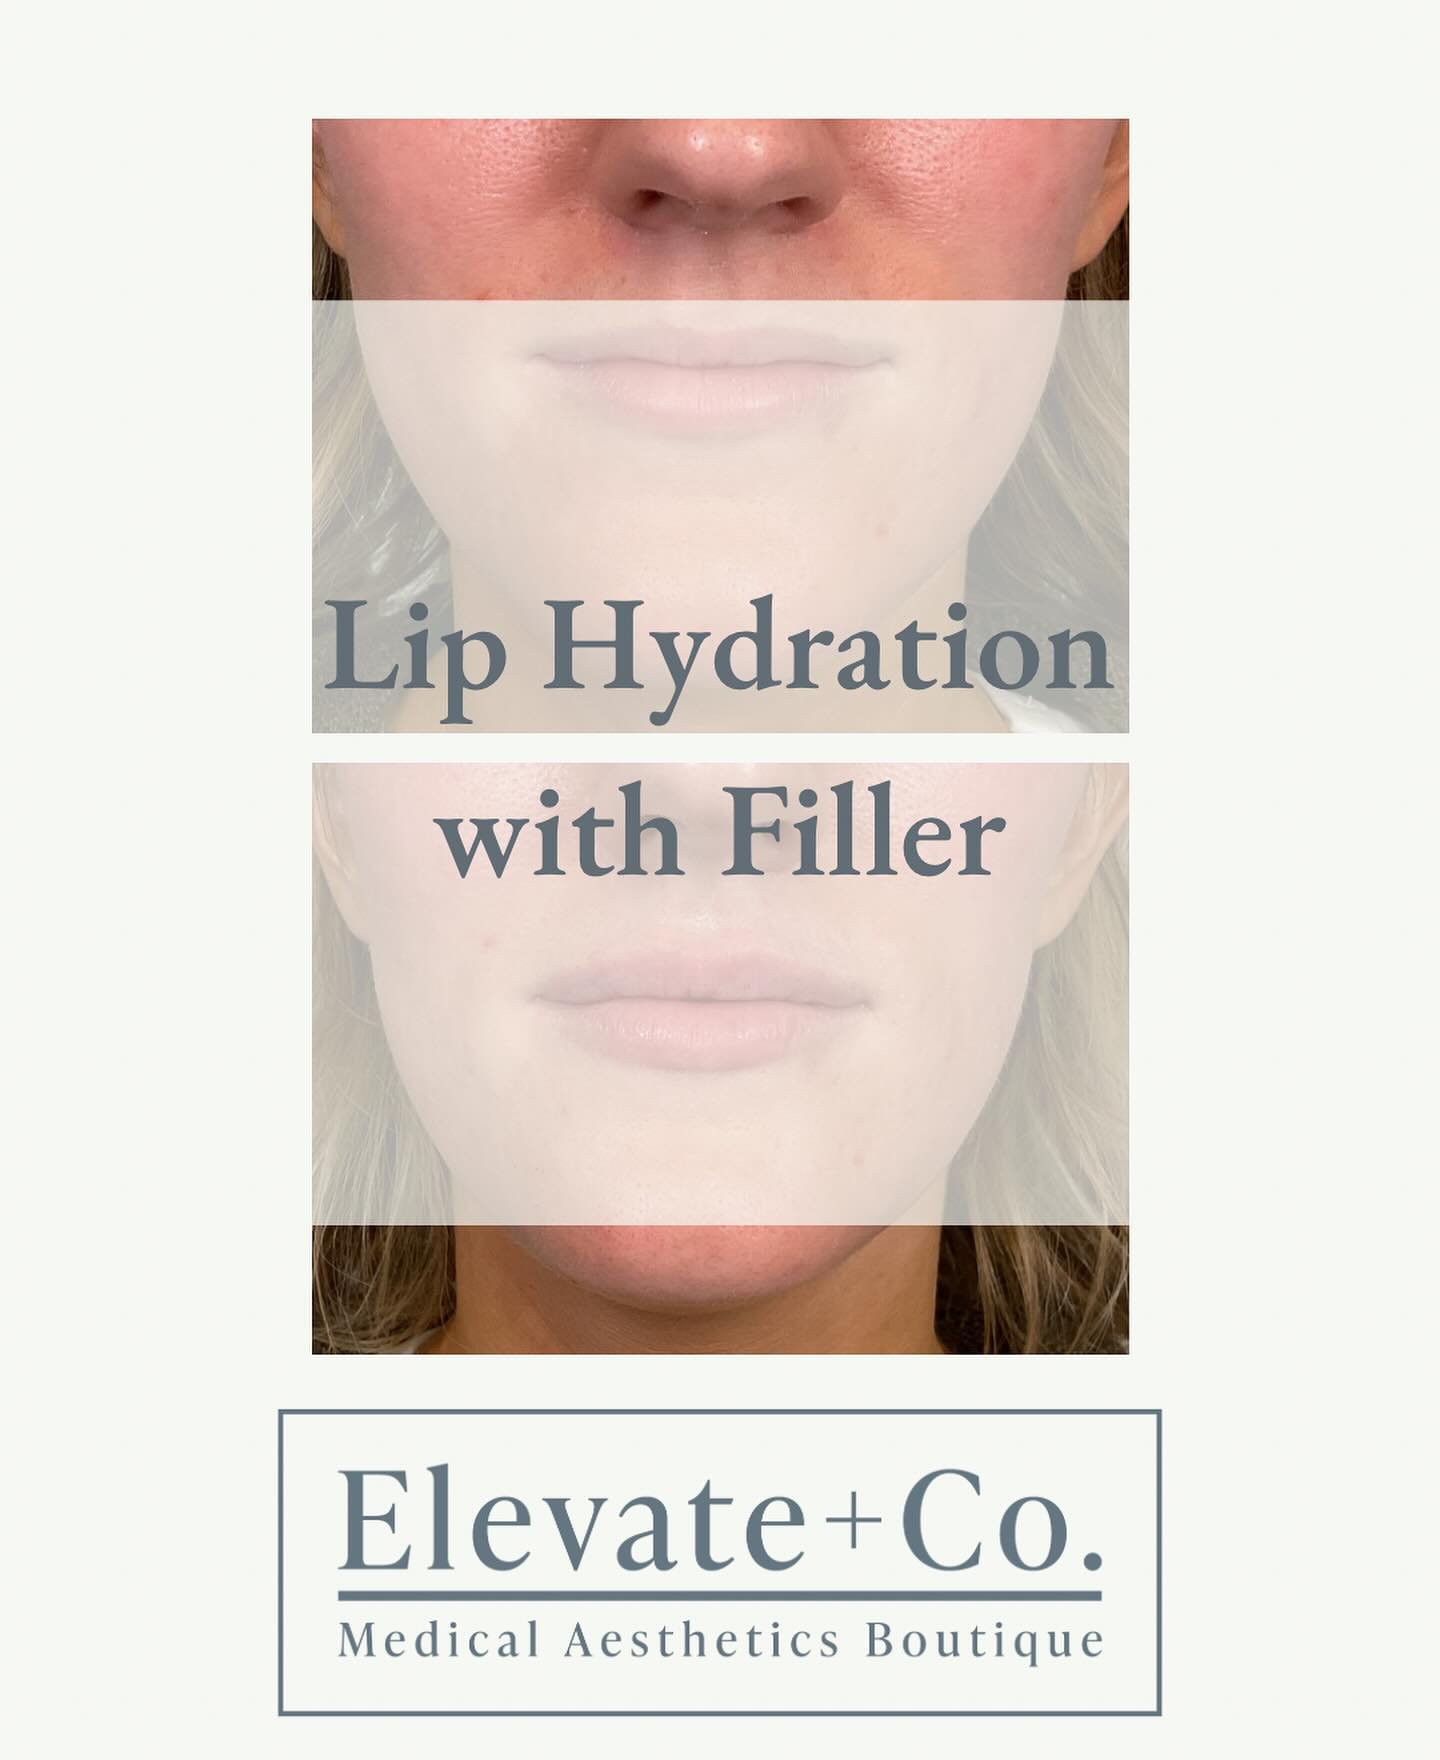 Patient: &ldquo;I don&rsquo;t want to have duck lips.&rdquo; 

Elevate + Co.: &ldquo;We got you.&rdquo;

Let&rsquo;s chat! Book your complimentary consultation conveniently through our online portal or call/text at 414-339-3499. 

&bull;&bull;&bull;&